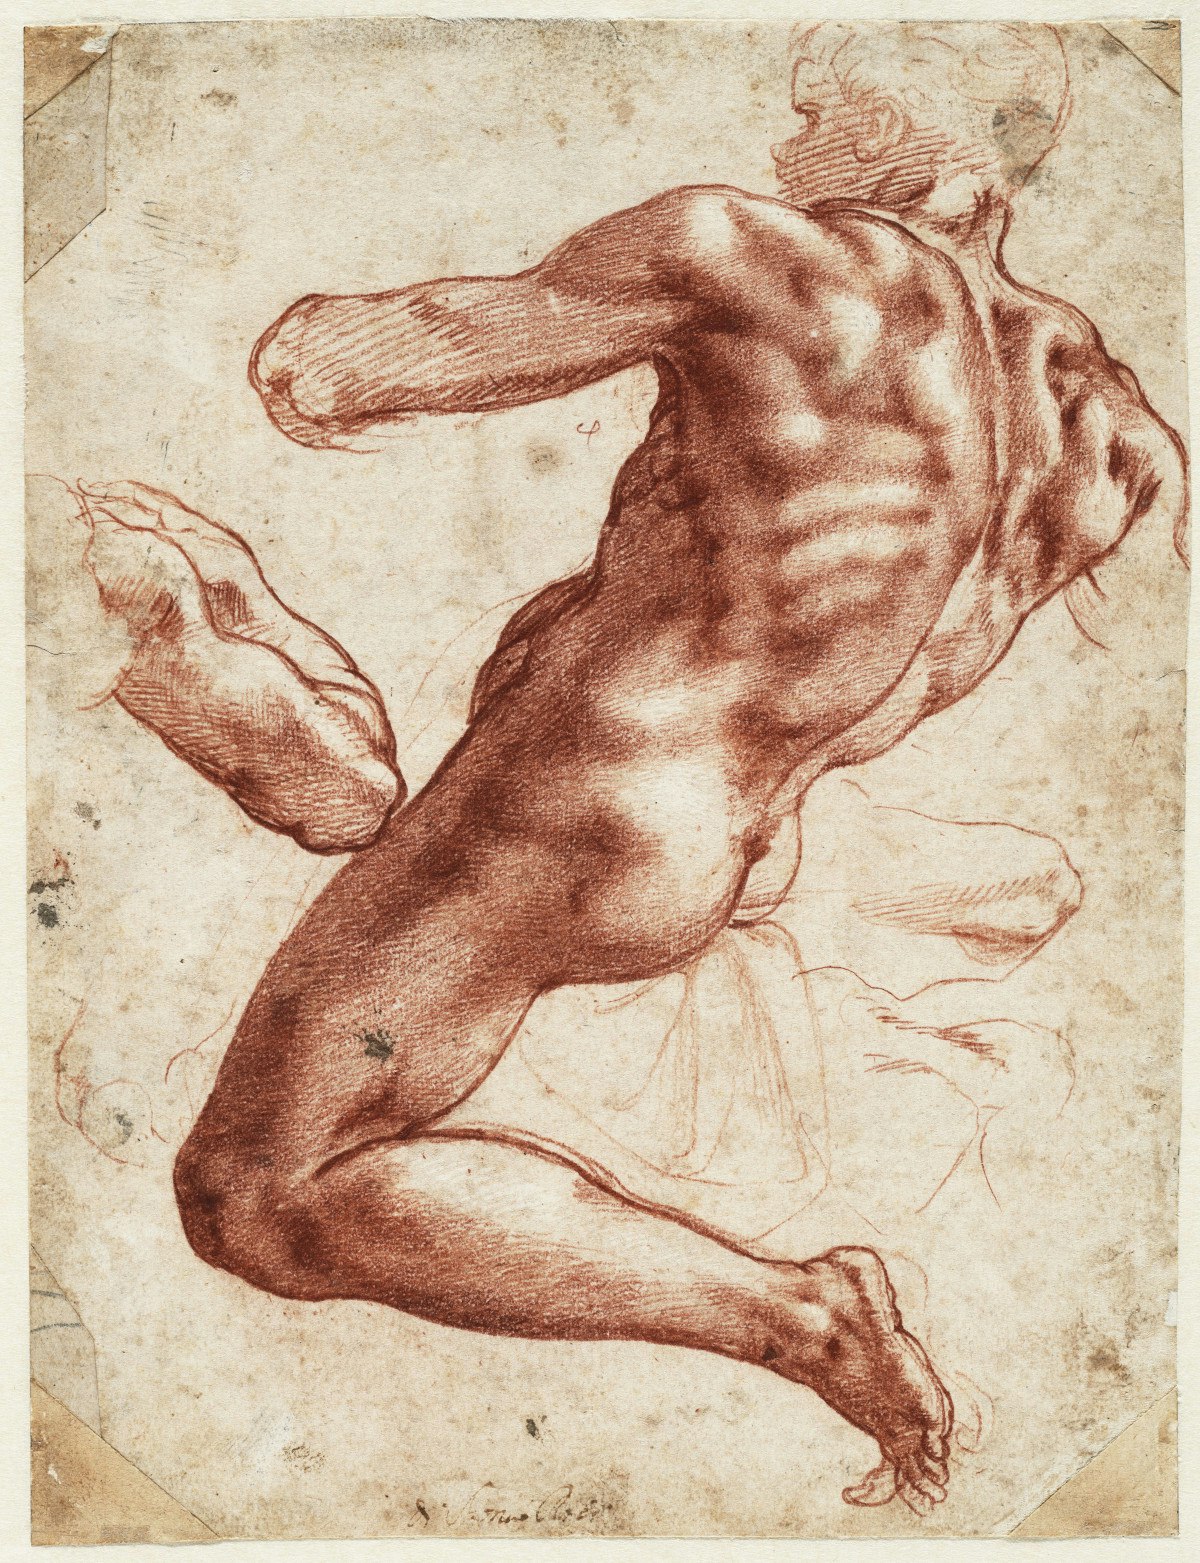 A preparatory sketch of a nude male figure meant for the ceiling of the Sistine Chapel, red on paper